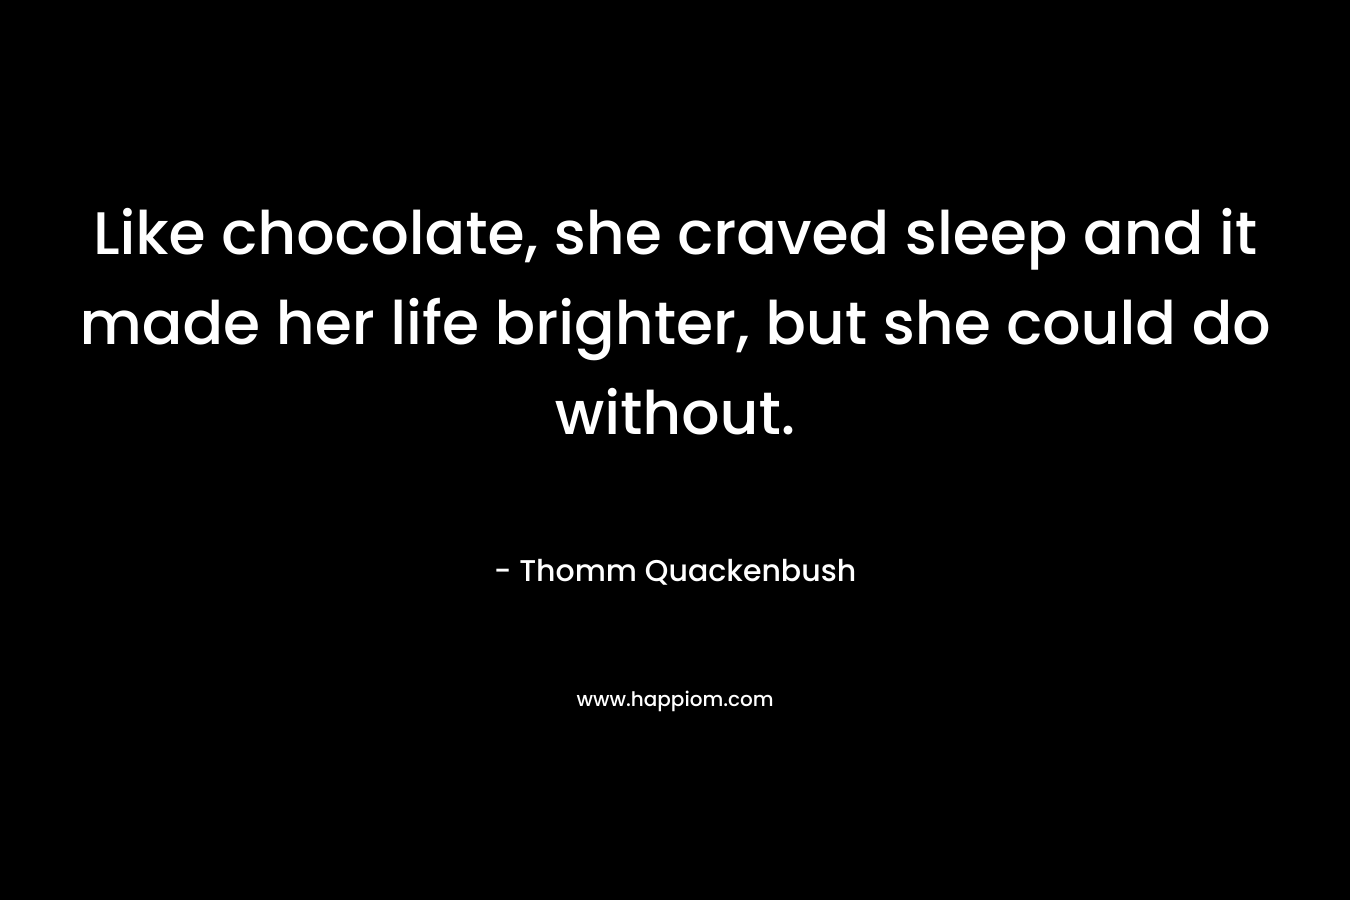 Like chocolate, she craved sleep and it made her life brighter, but she could do without.